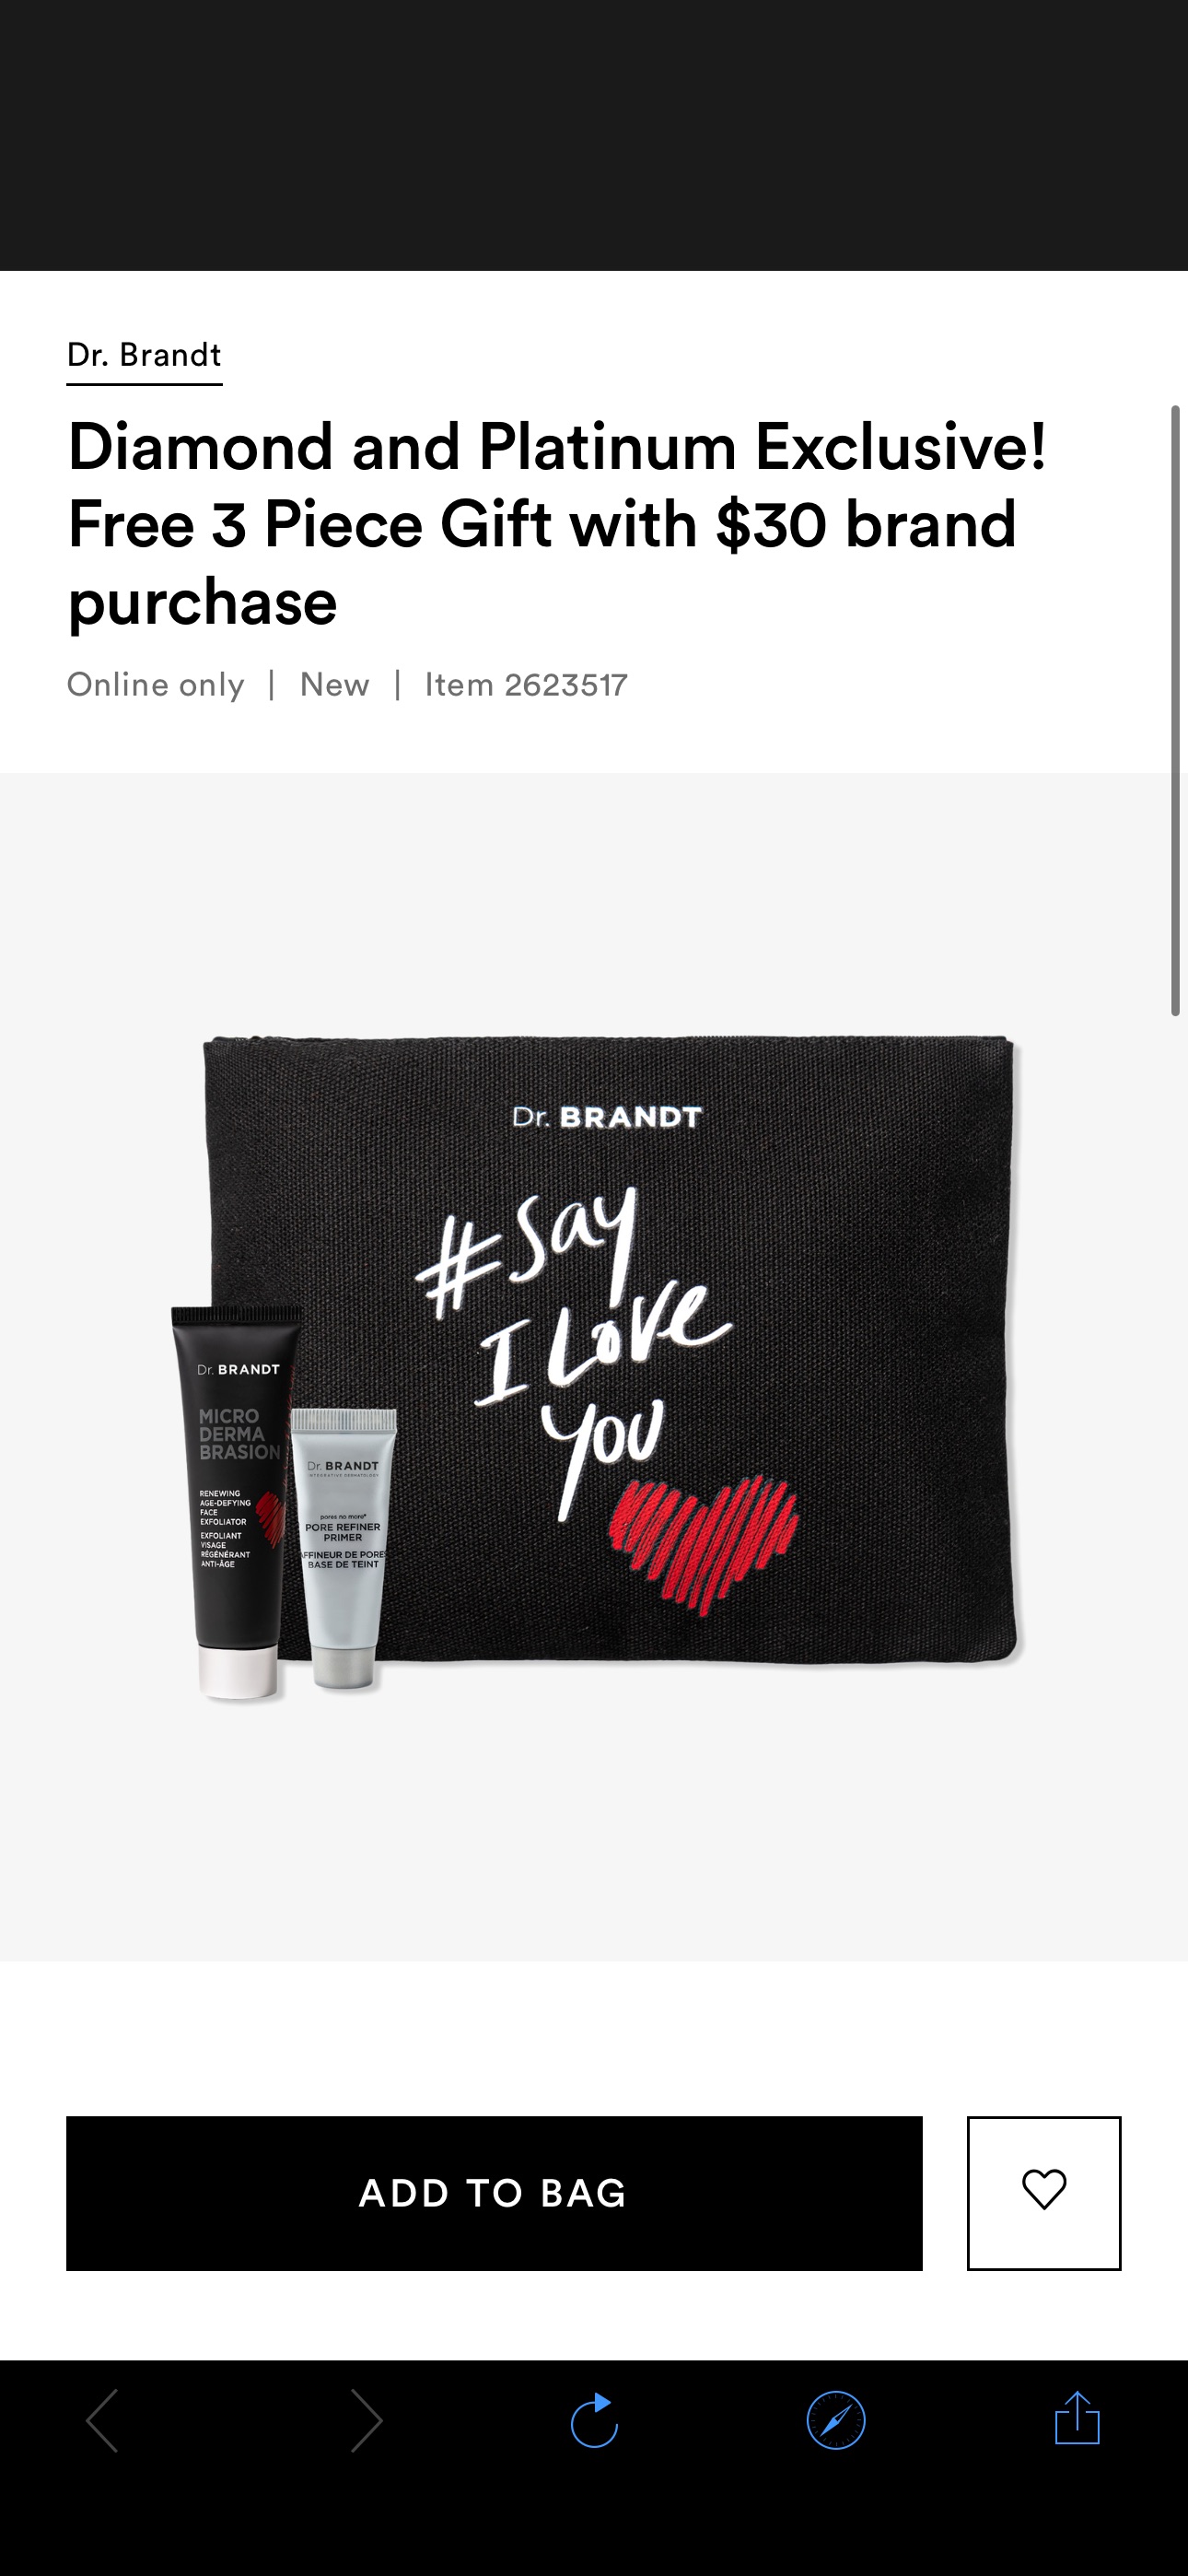 Diamond and Platinum Exclusive! Free 3 Piece Gift with $30 brand purchase - Dr. Brandt | Ulta Beauty